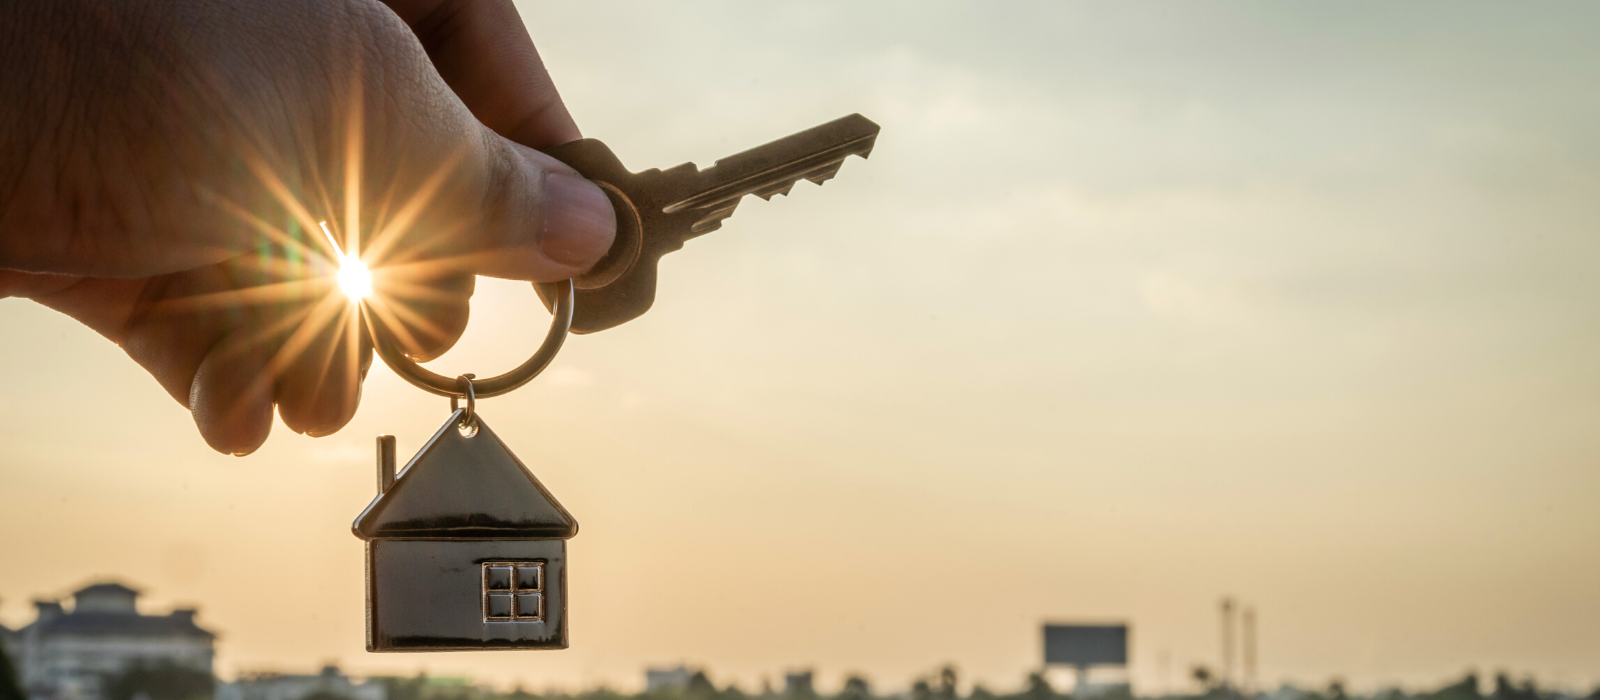 Landlord Insurance: Do You Really Need It?